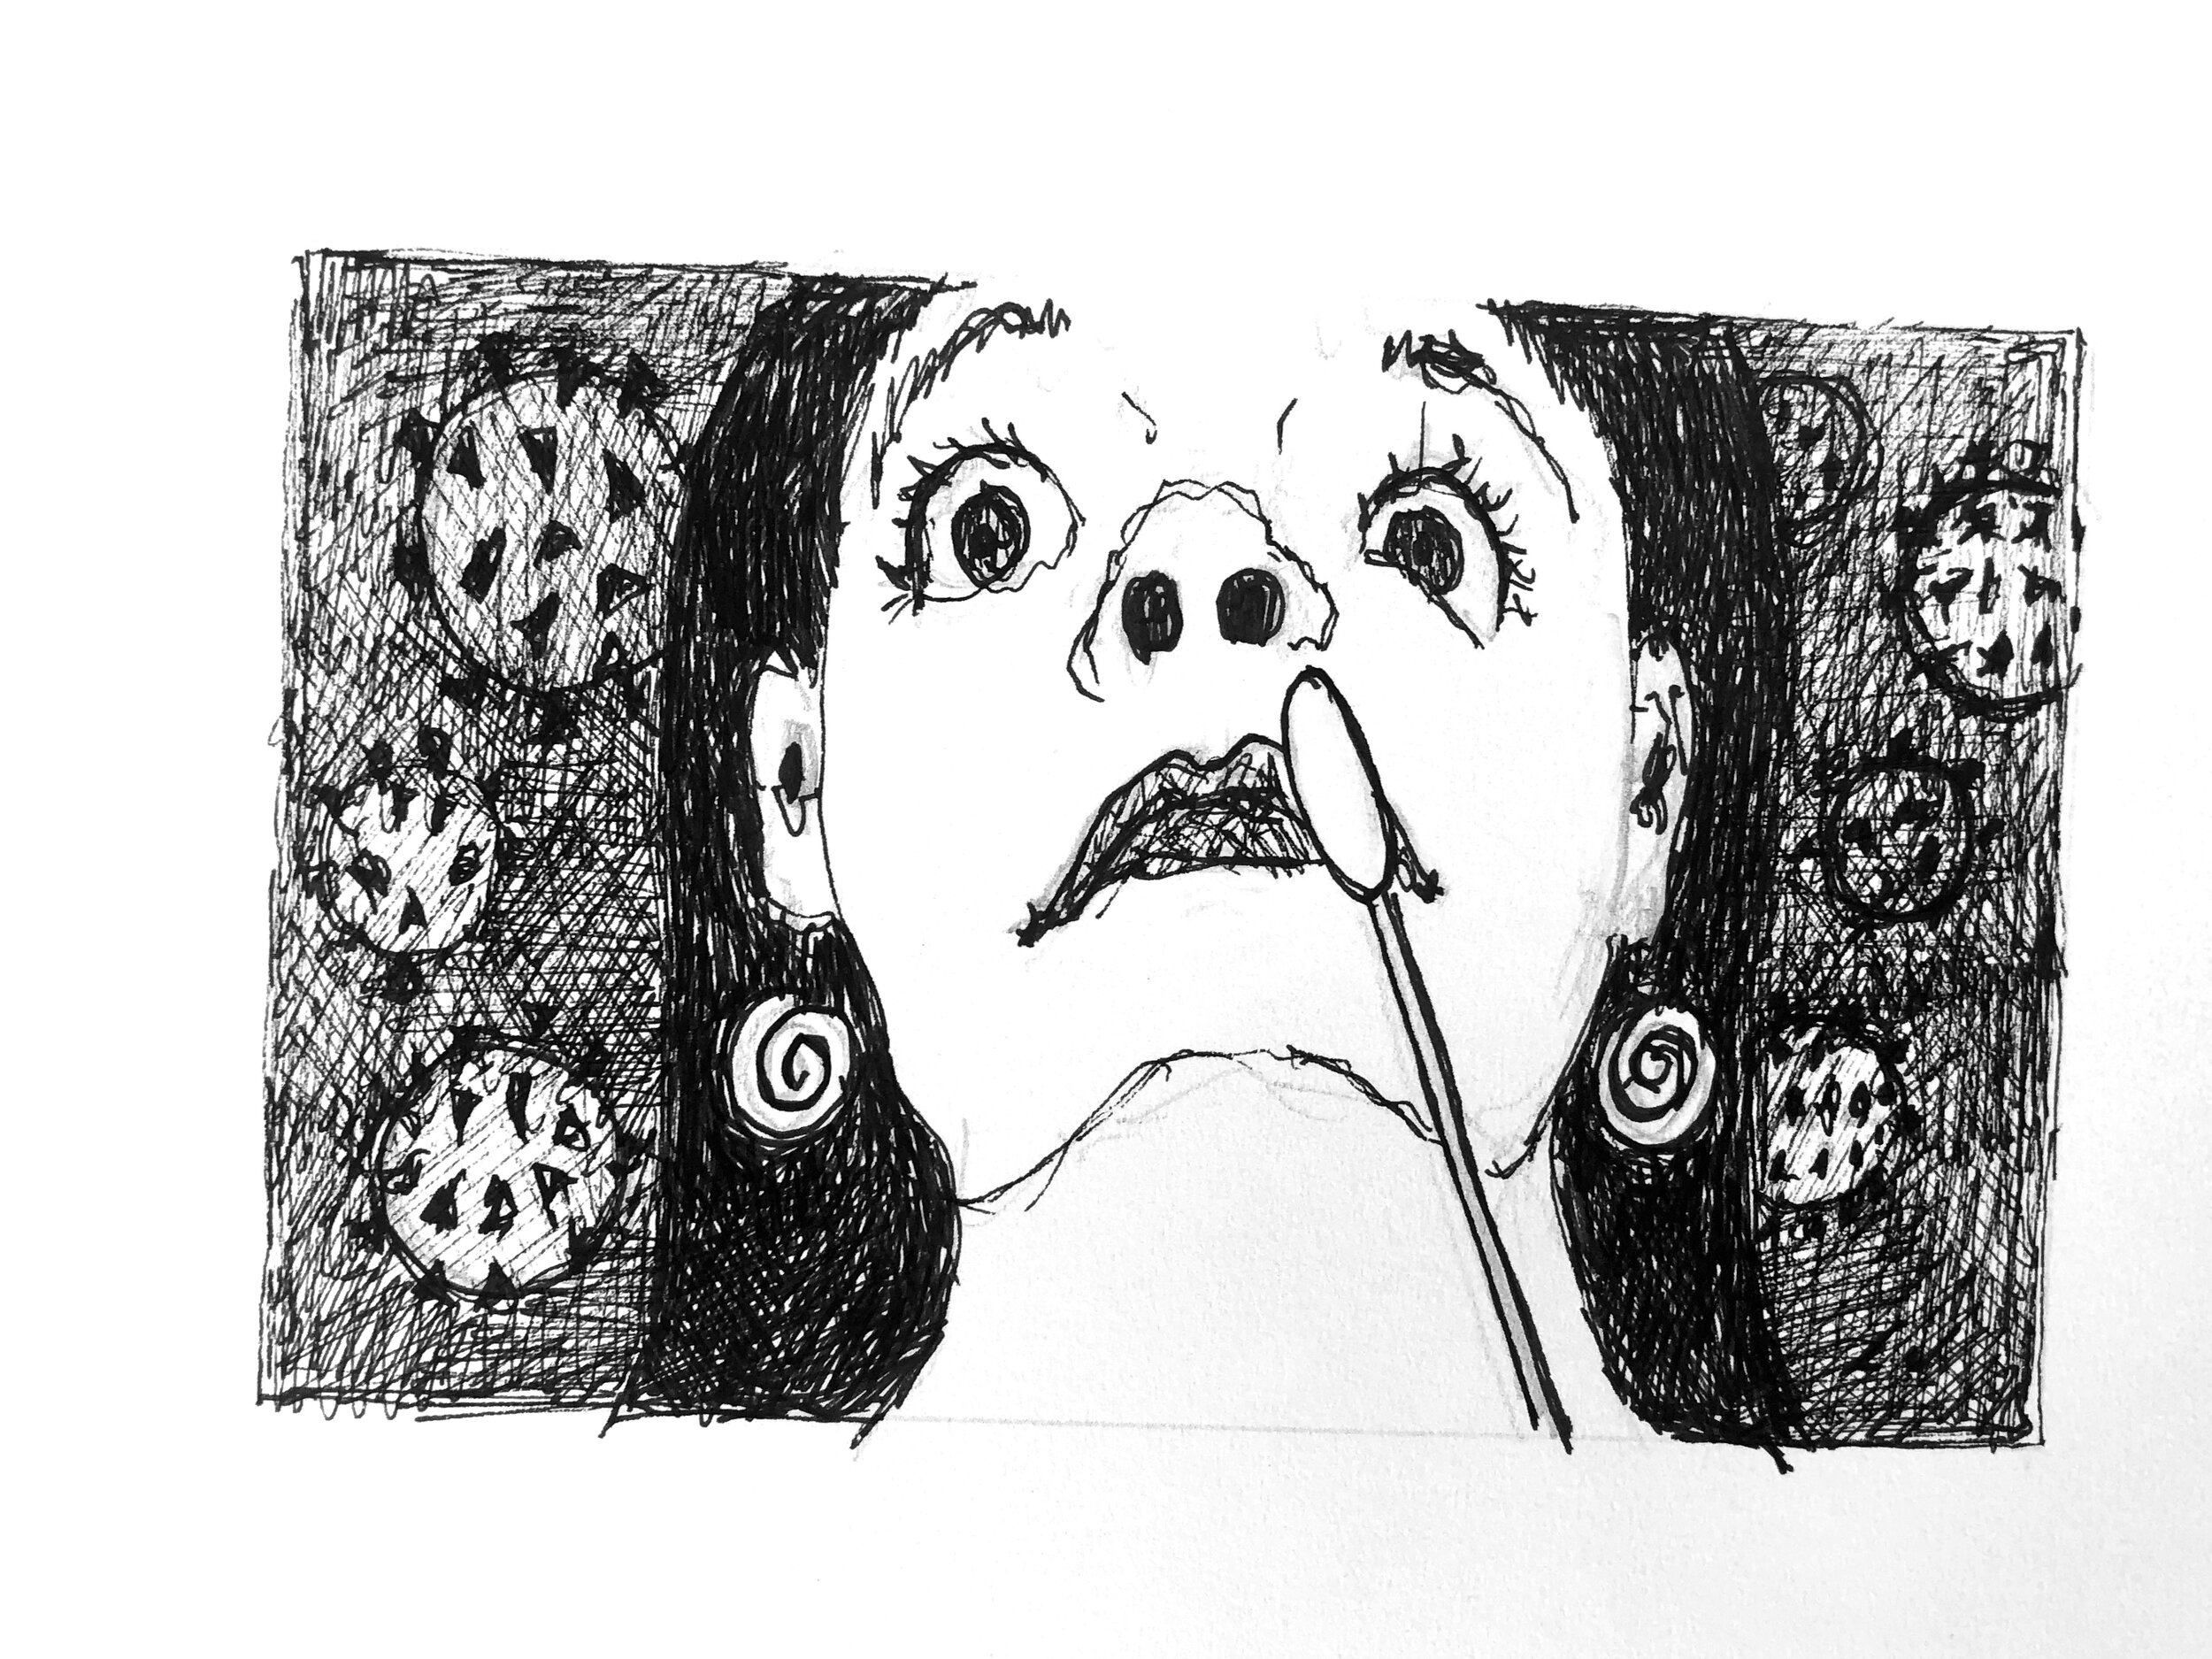 Libby Johnson, "Self Portrait with a Swab", 2020, pen and ink on paper